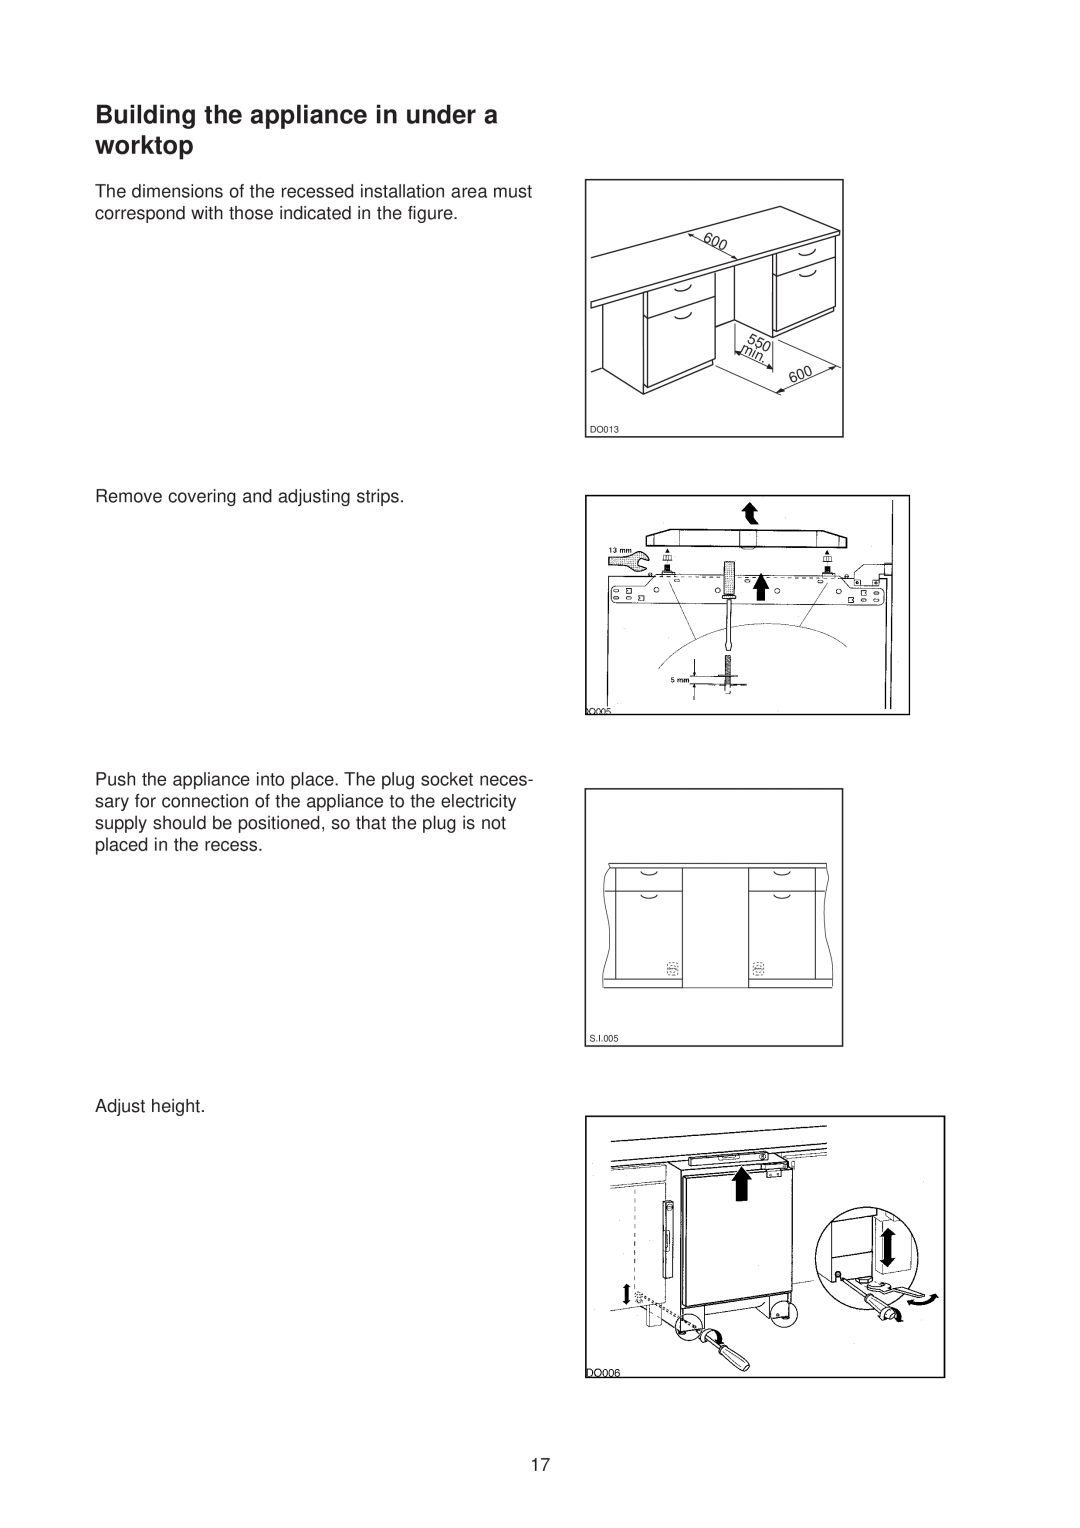 Electrolux ER 6436 manual Building the appliance in under a worktop, S.I.005, DO013 